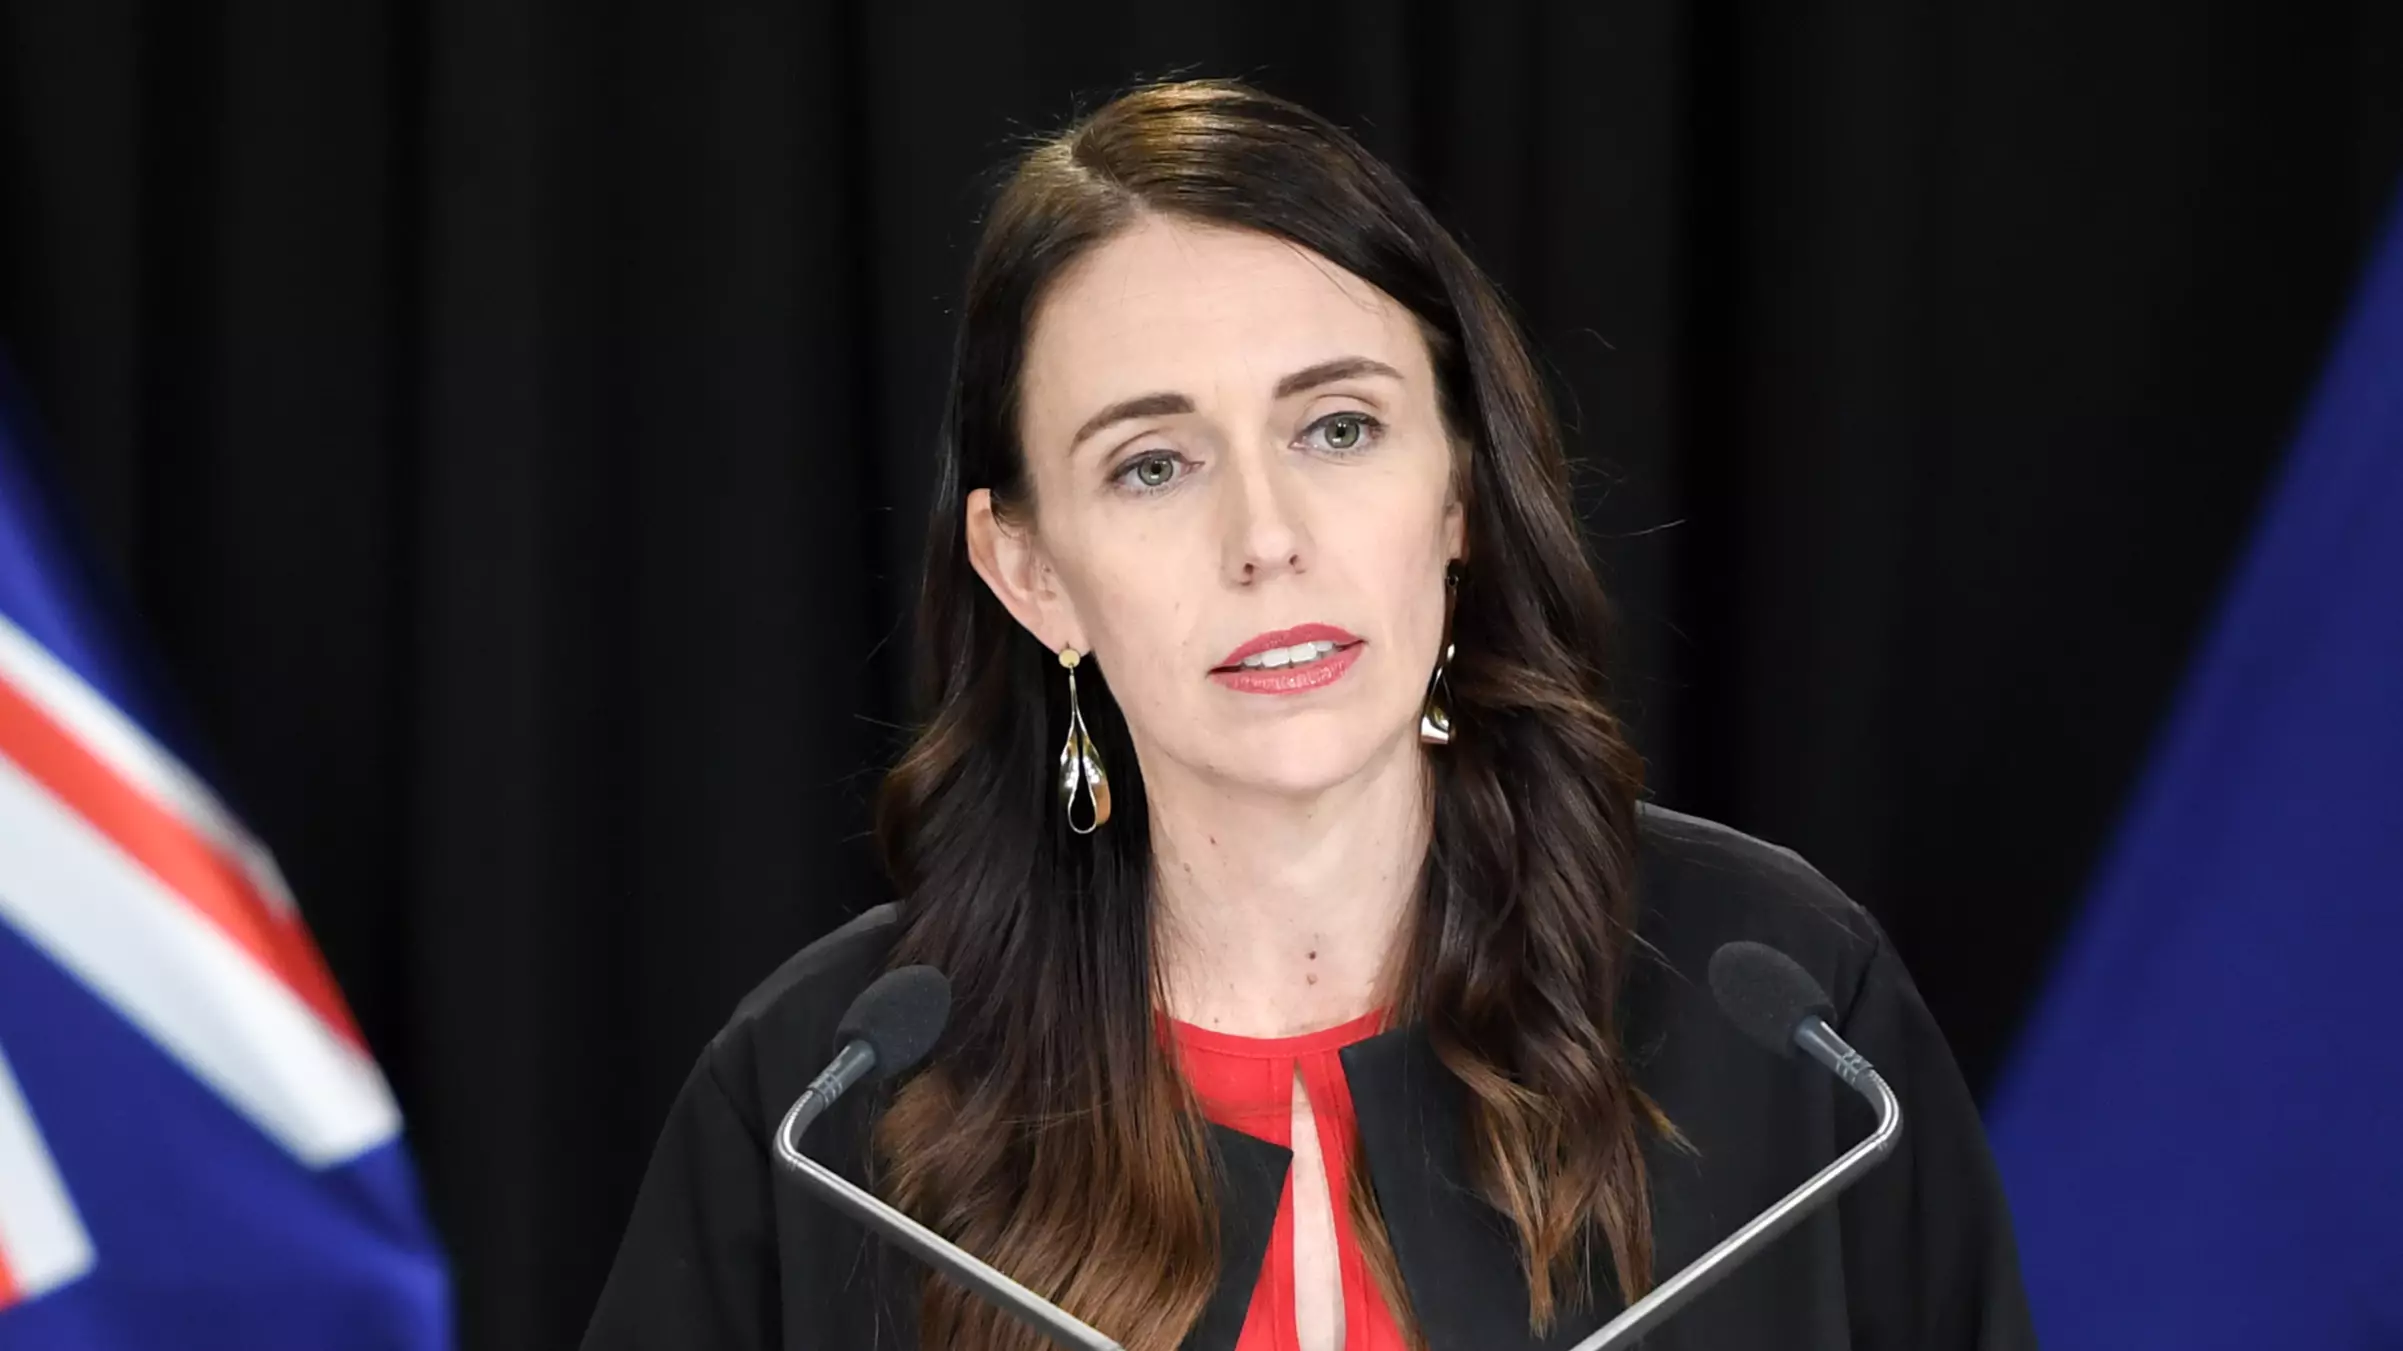 Jacinda Ardern Sends Firefighters From New Zealand To Help With Bushfire Crisis